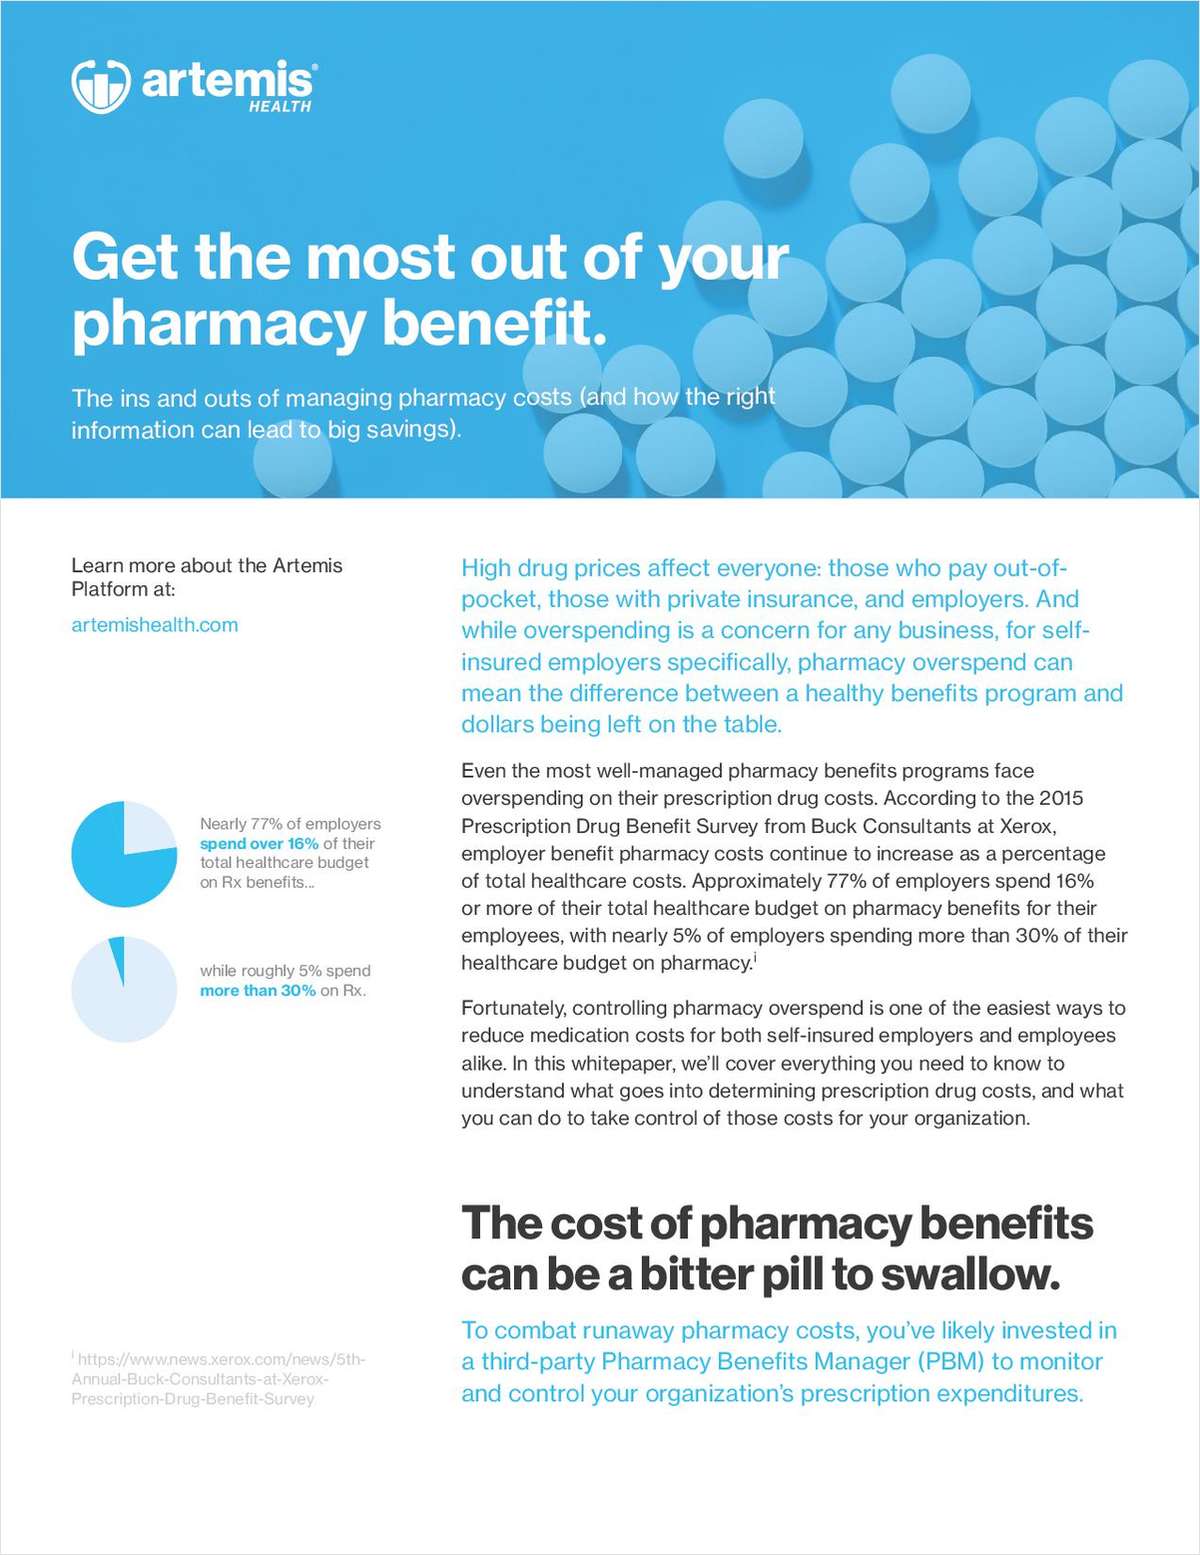 Are You Getting The Most Out of Your Pharmacy Benefits Data?